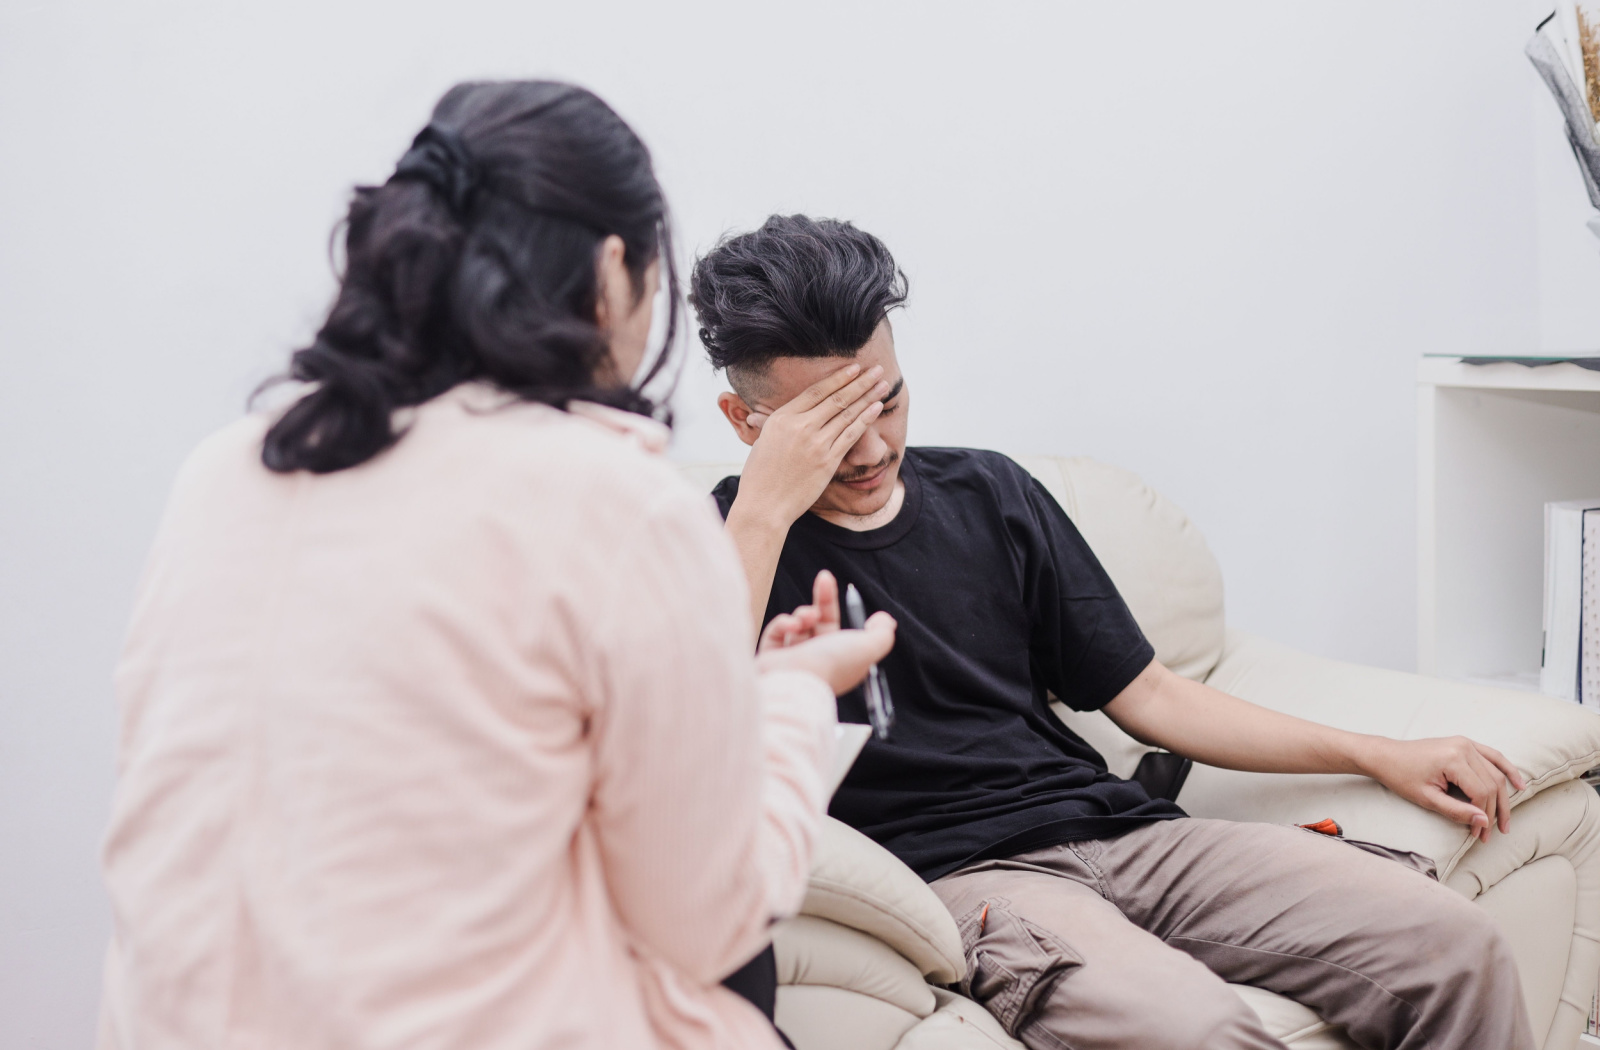 A young man in distress sitting on a sofa and listening to a psychologist while she gives him advice.